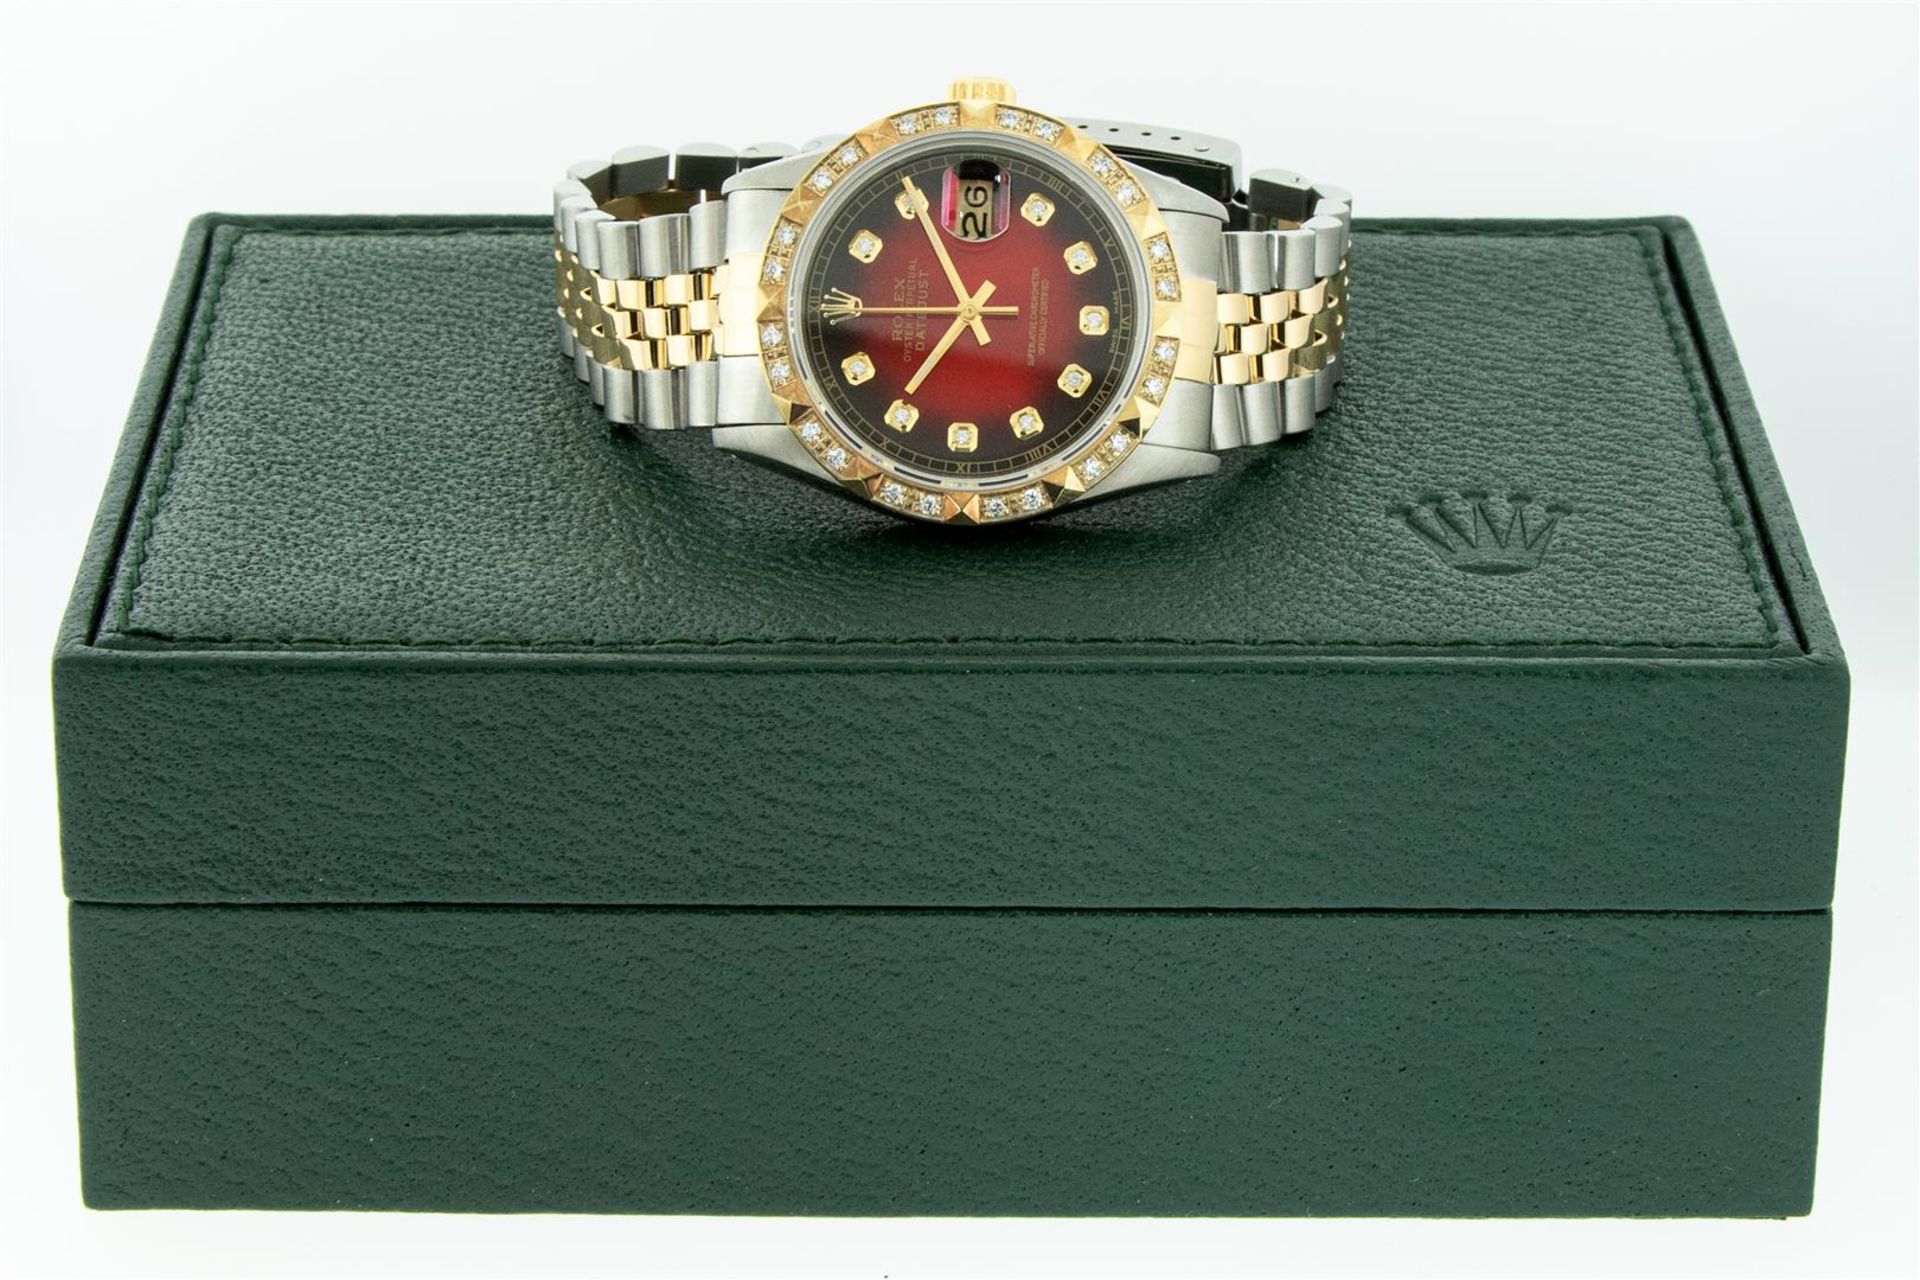 Rolex Mens 2 Tone Red Vignette Pyramid Diamond 36MM Oyster Perpetual Datejust Wi - Image 7 of 9